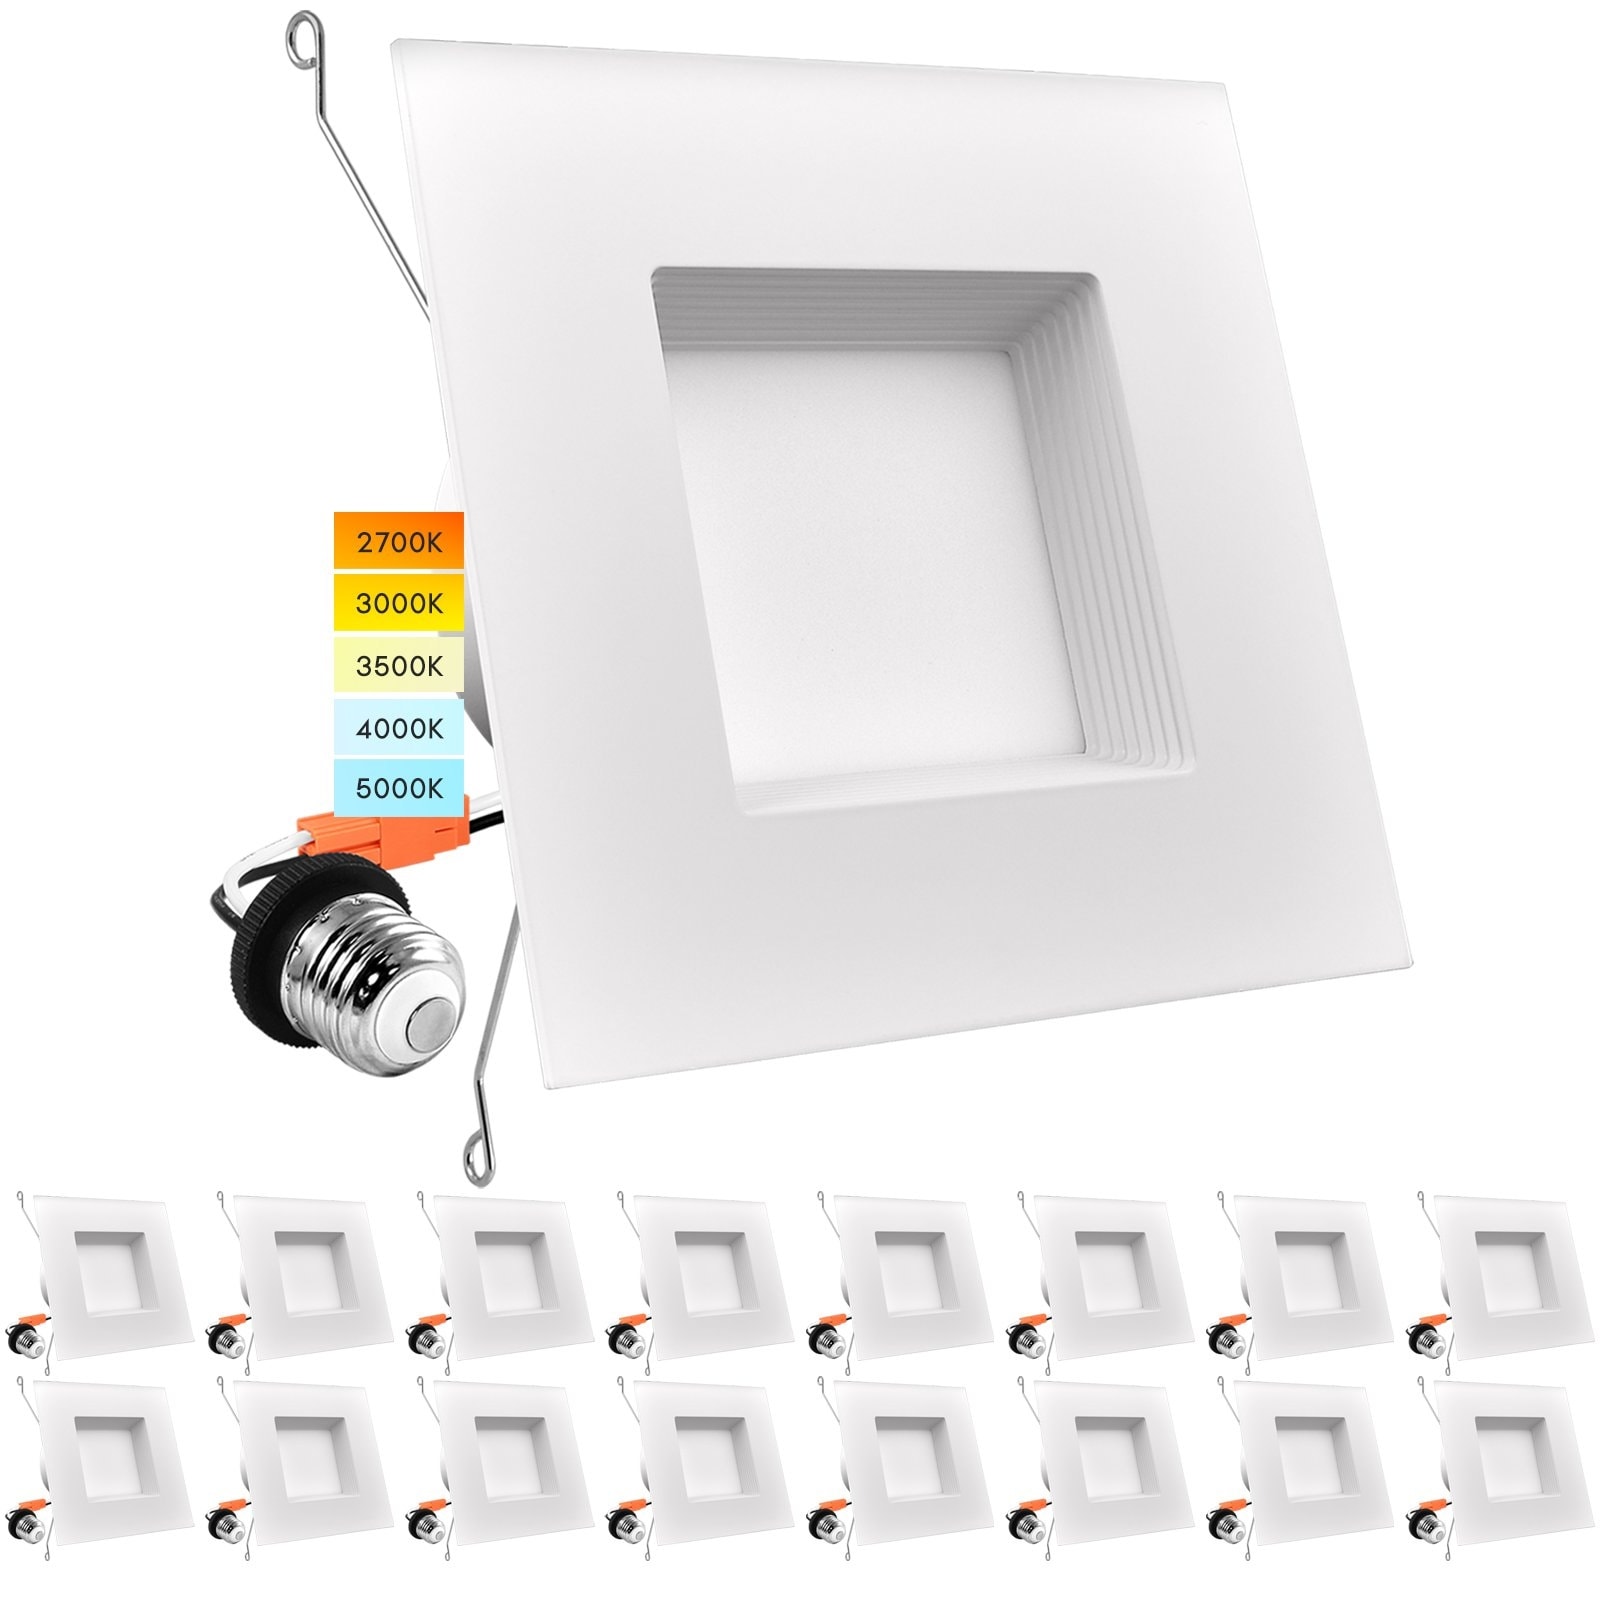 Luxrite 6 Ultra Thin LED Recessed Light J-Box 12W 5 Color Options